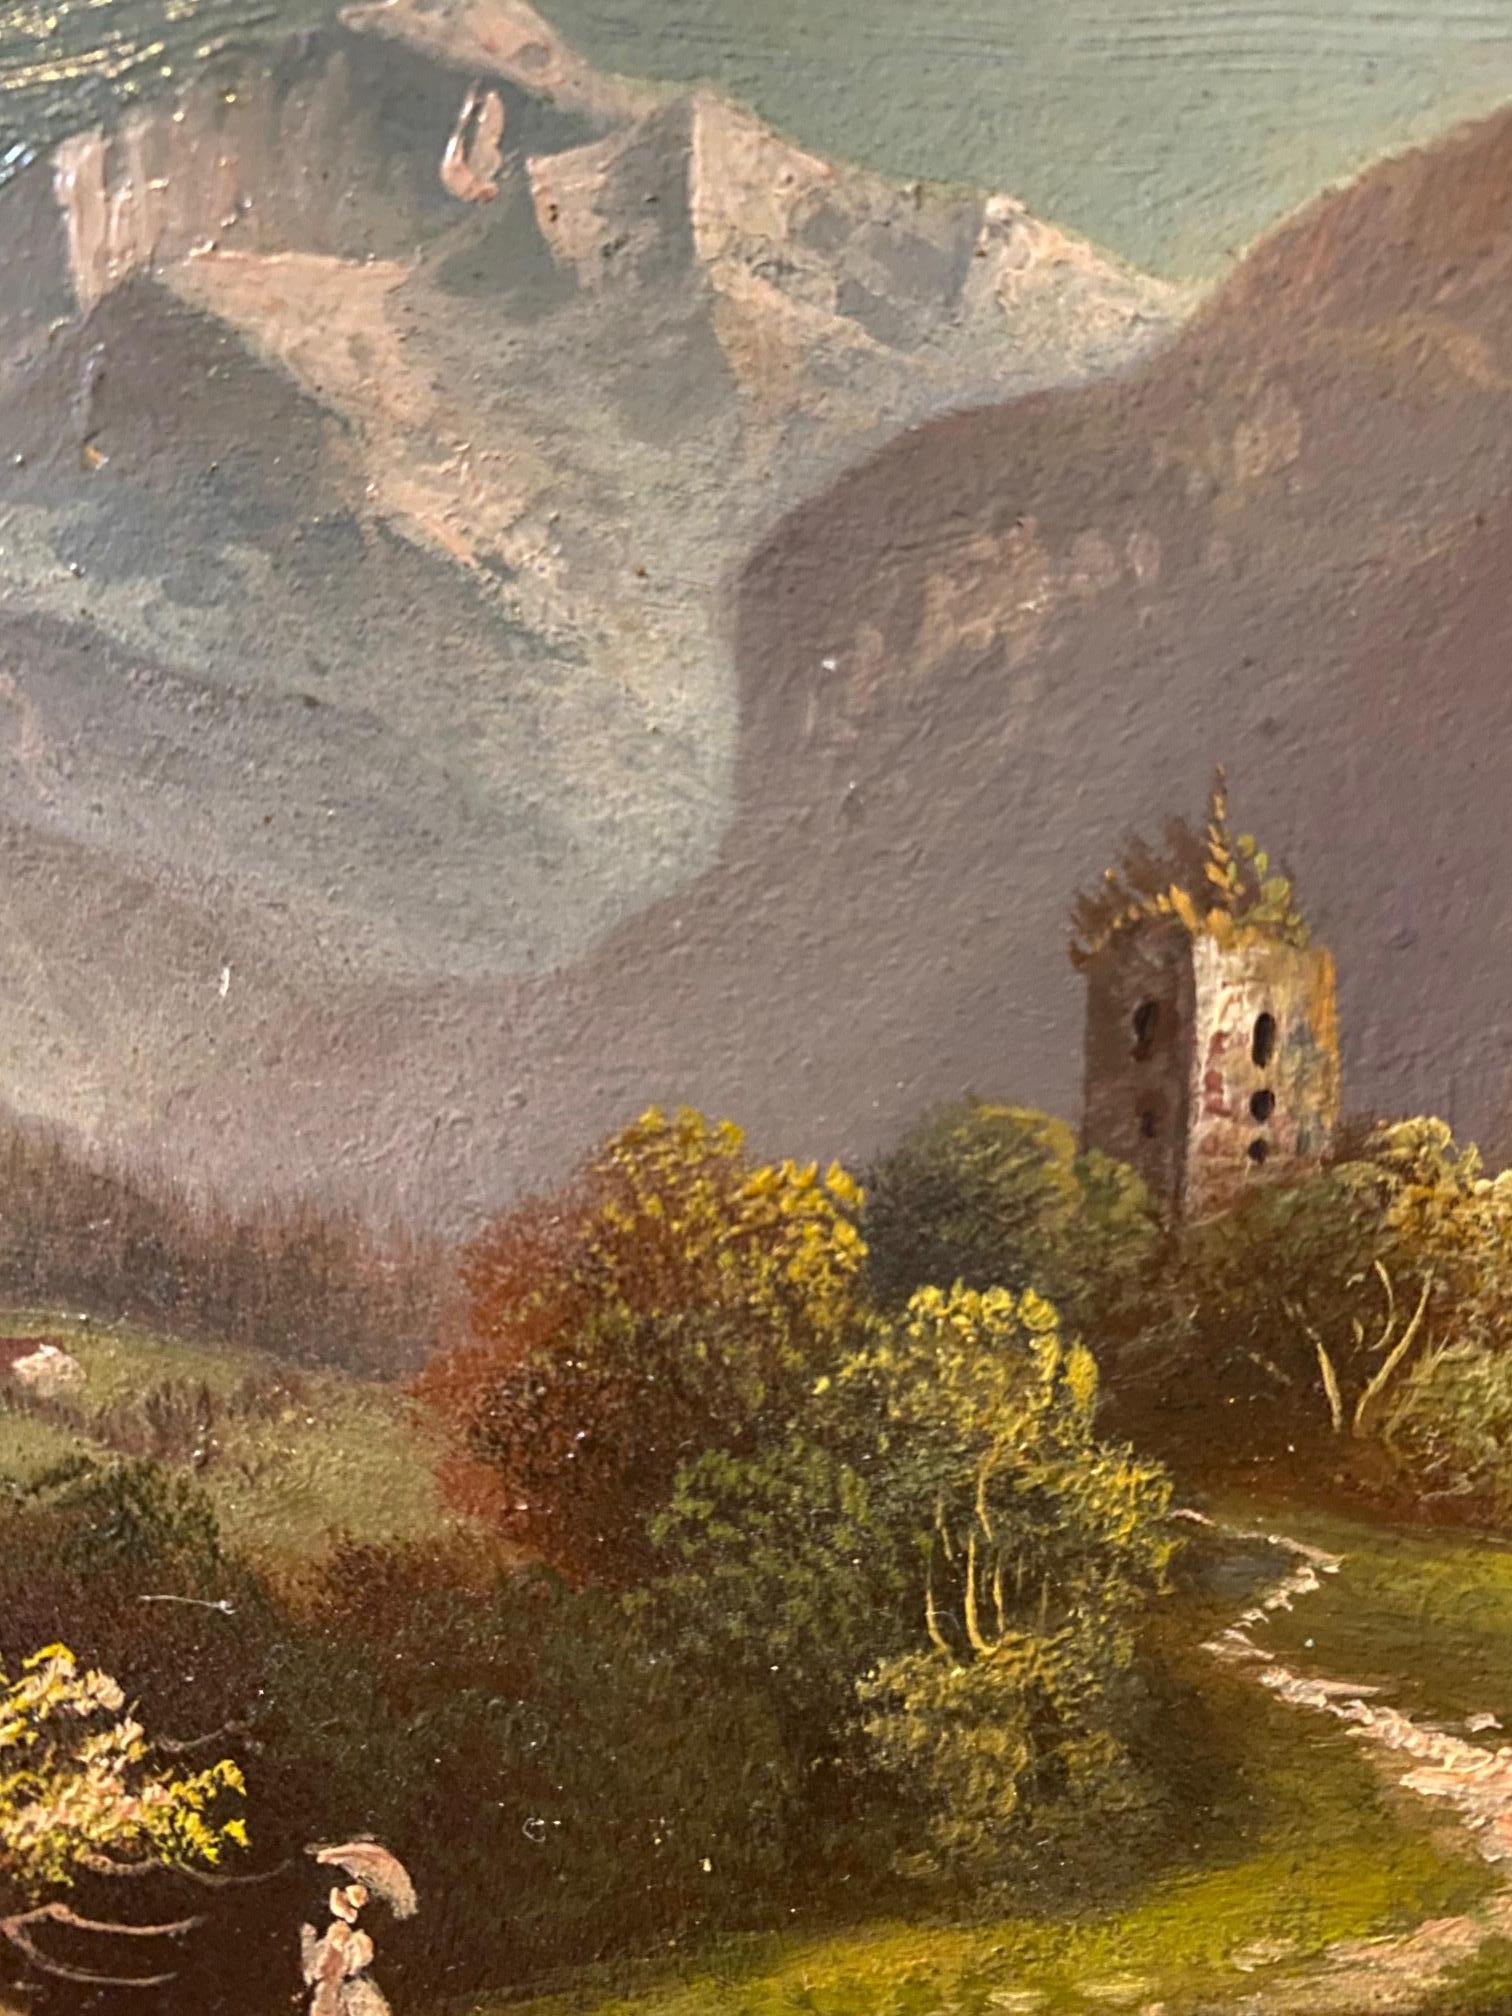 Oil on cardboard sold with frame. The total size with frame is 21x23 cm. 
The work is unsigned but we can recognize the Ruine Undspunnen and the Jungfrau in Switzerland. Dated around mid 19th century 